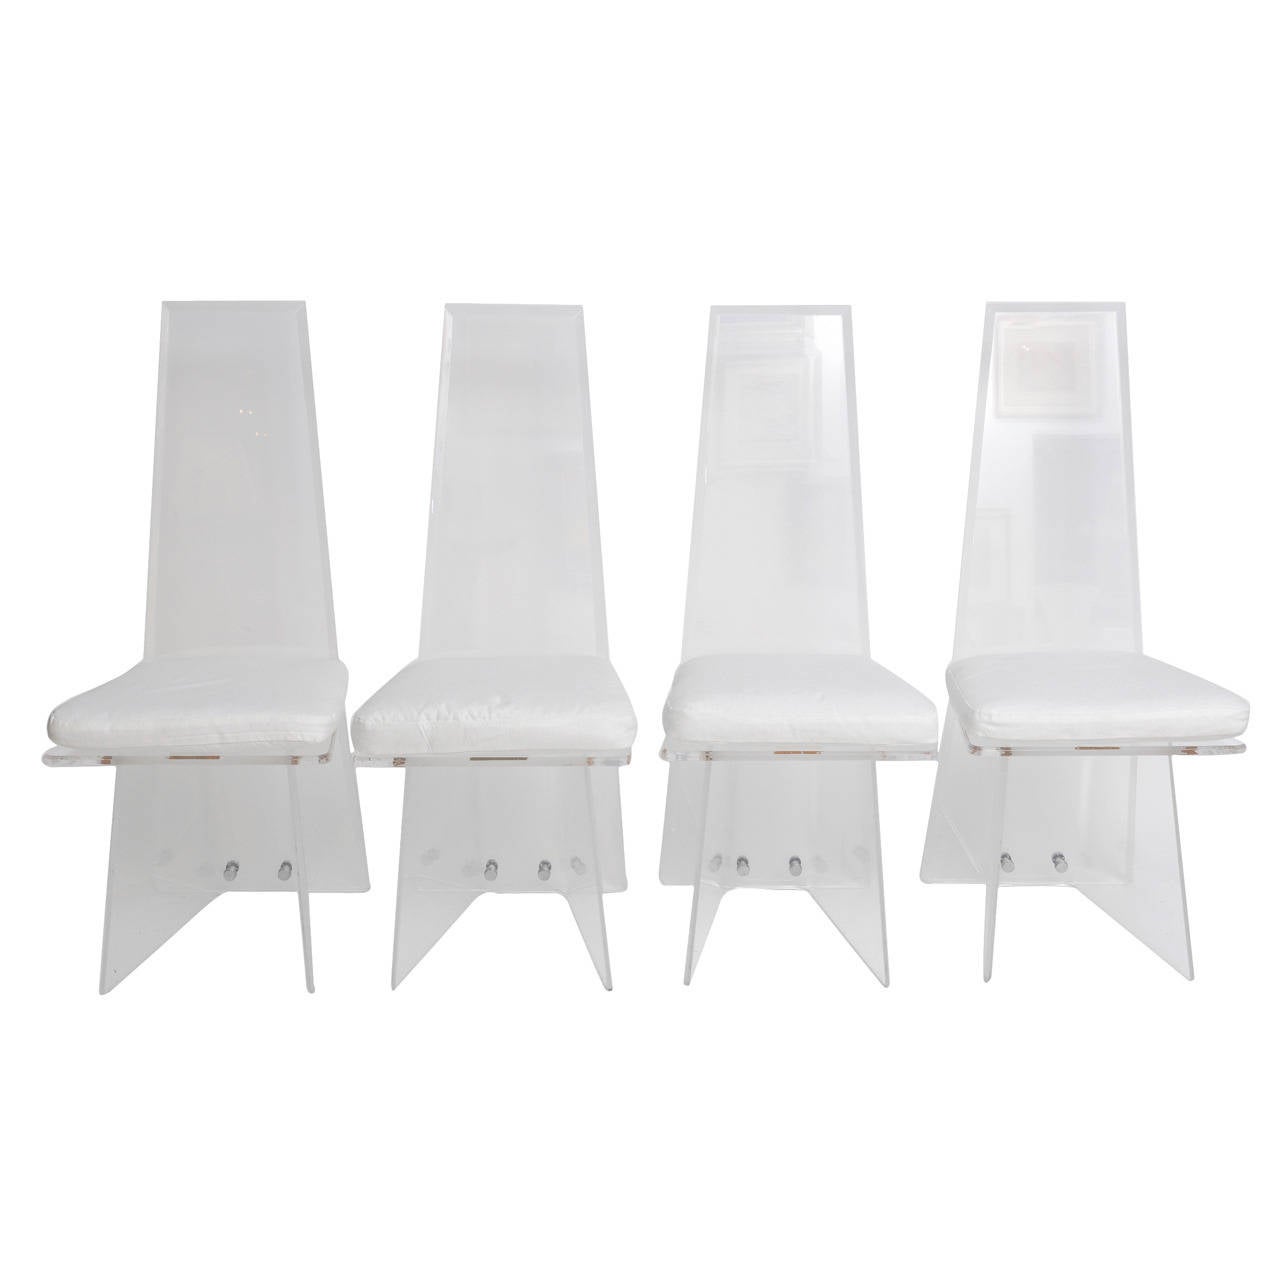 Four sculptural lucite chairs with tapered high backs and angular bases. Chromed screw covers connect the bases to the backs. Cushions newly covered in bright white cotton fabric easily reupholstered in the fabric of your choice and attached to the